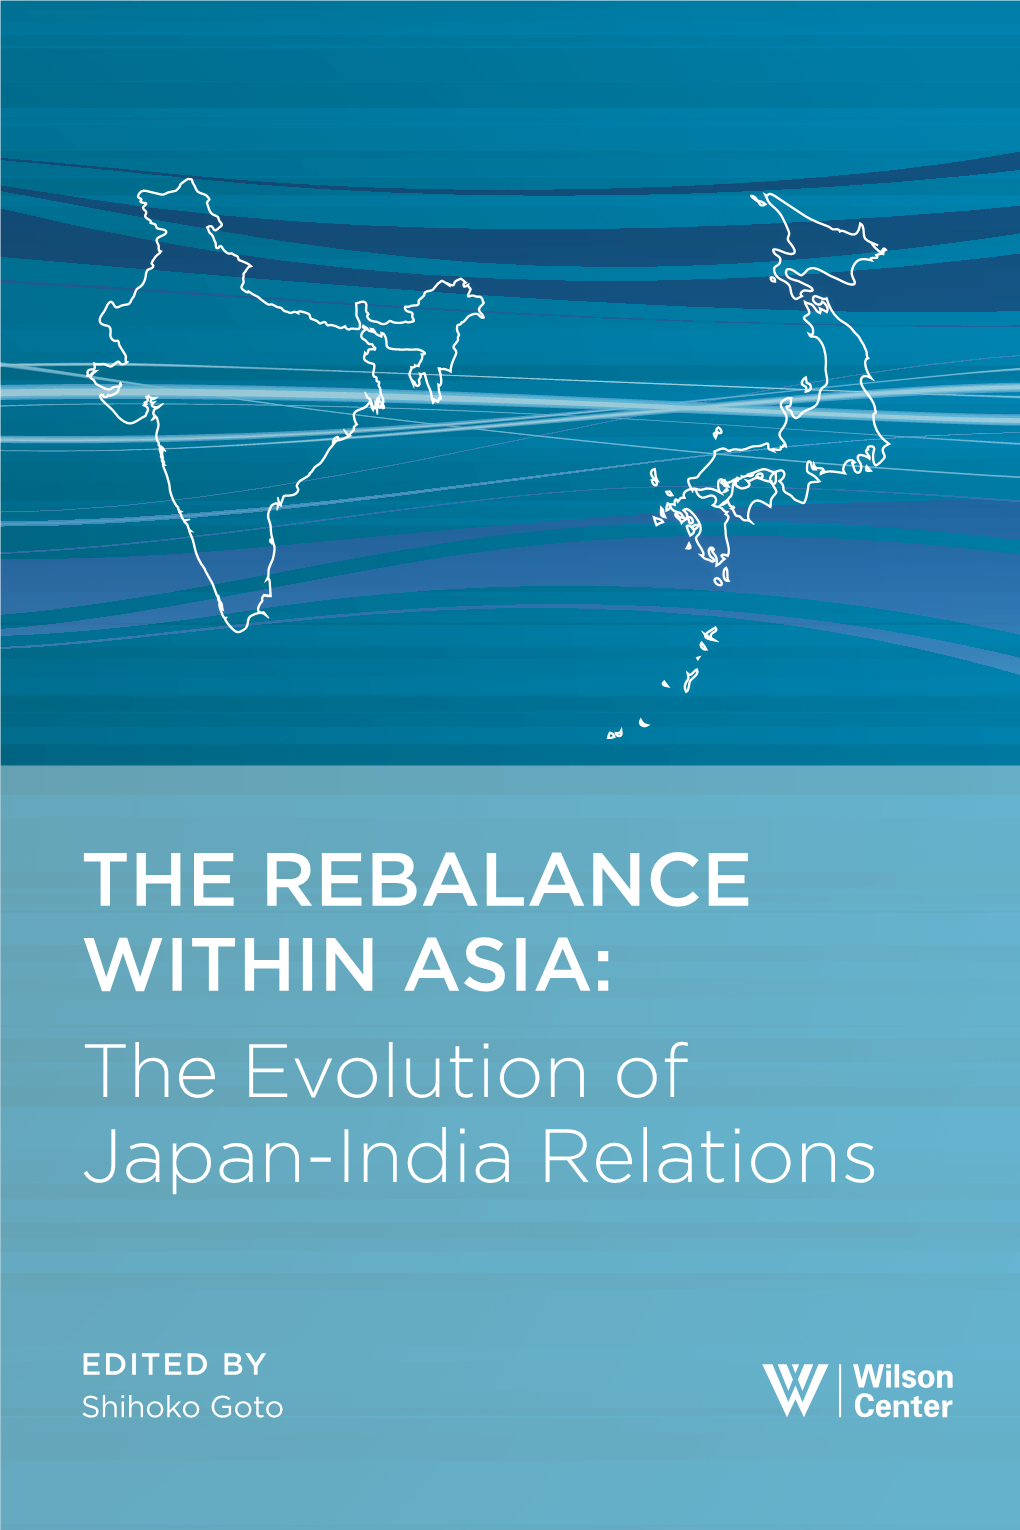 THE REBALANCE WITHIN ASIA: the Evolution of Japan-India Relations the REBALANCE WITHIN ASIA: the Evolution of Japan-India Relations